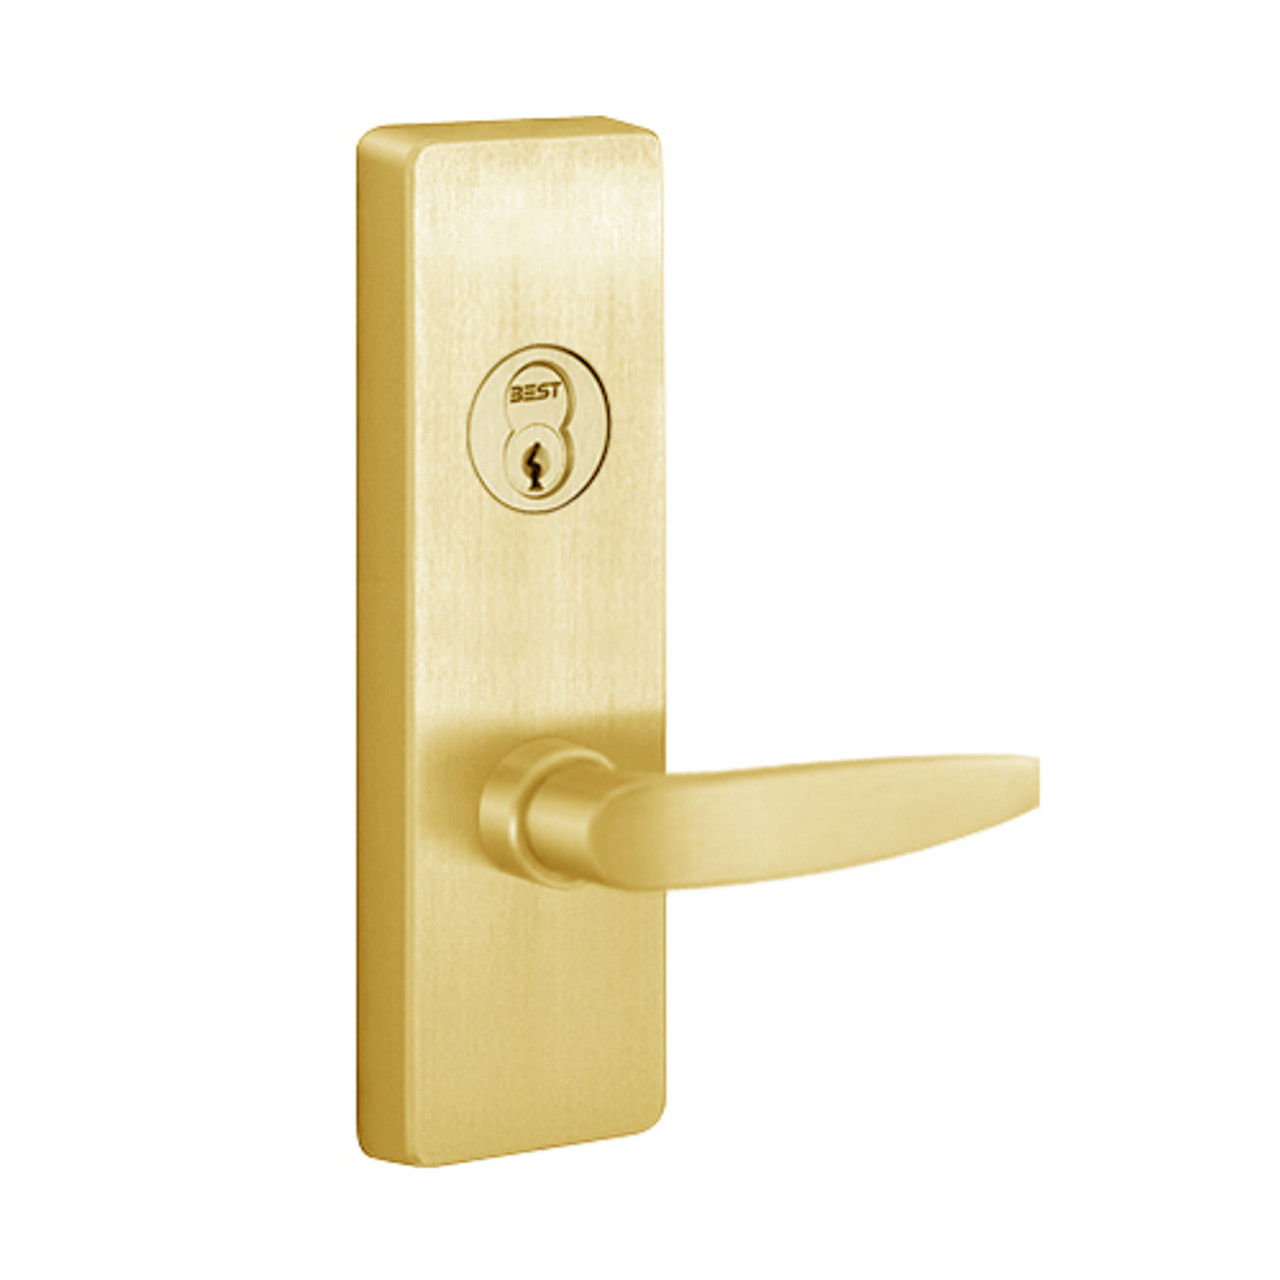 Y4908B-605-LHR PHI Key Controls Lever Trim with B Lever Design for Olympian Series Exit Device in Bright Brass Finish